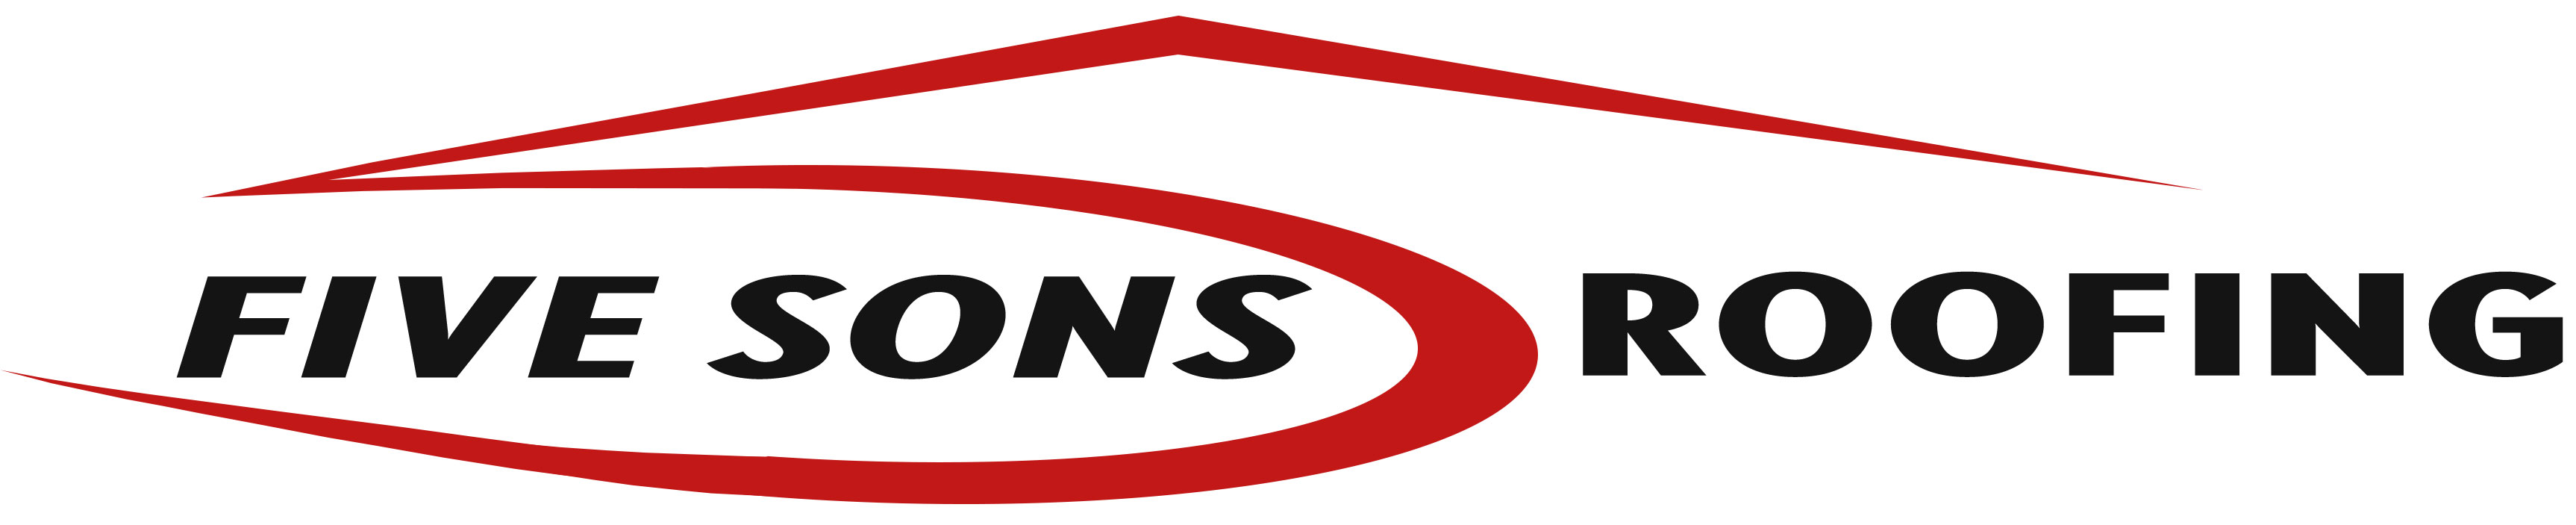 Five Sons Roofing Logo